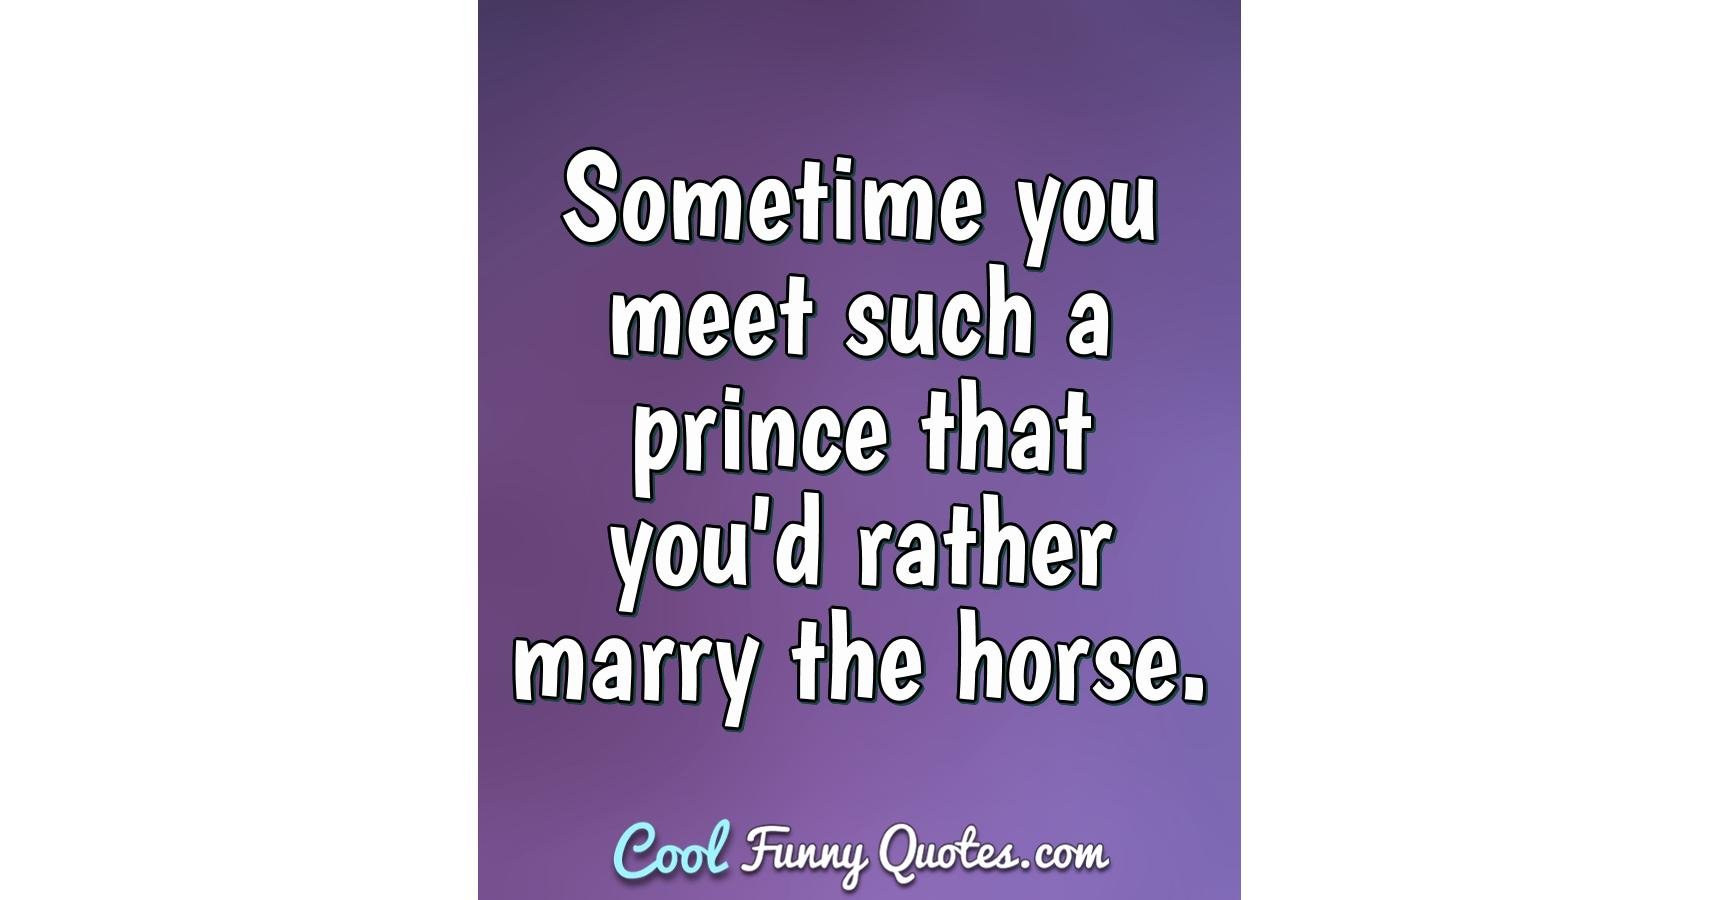 Sometime you meet such a prince that you'd rather marry the horse.